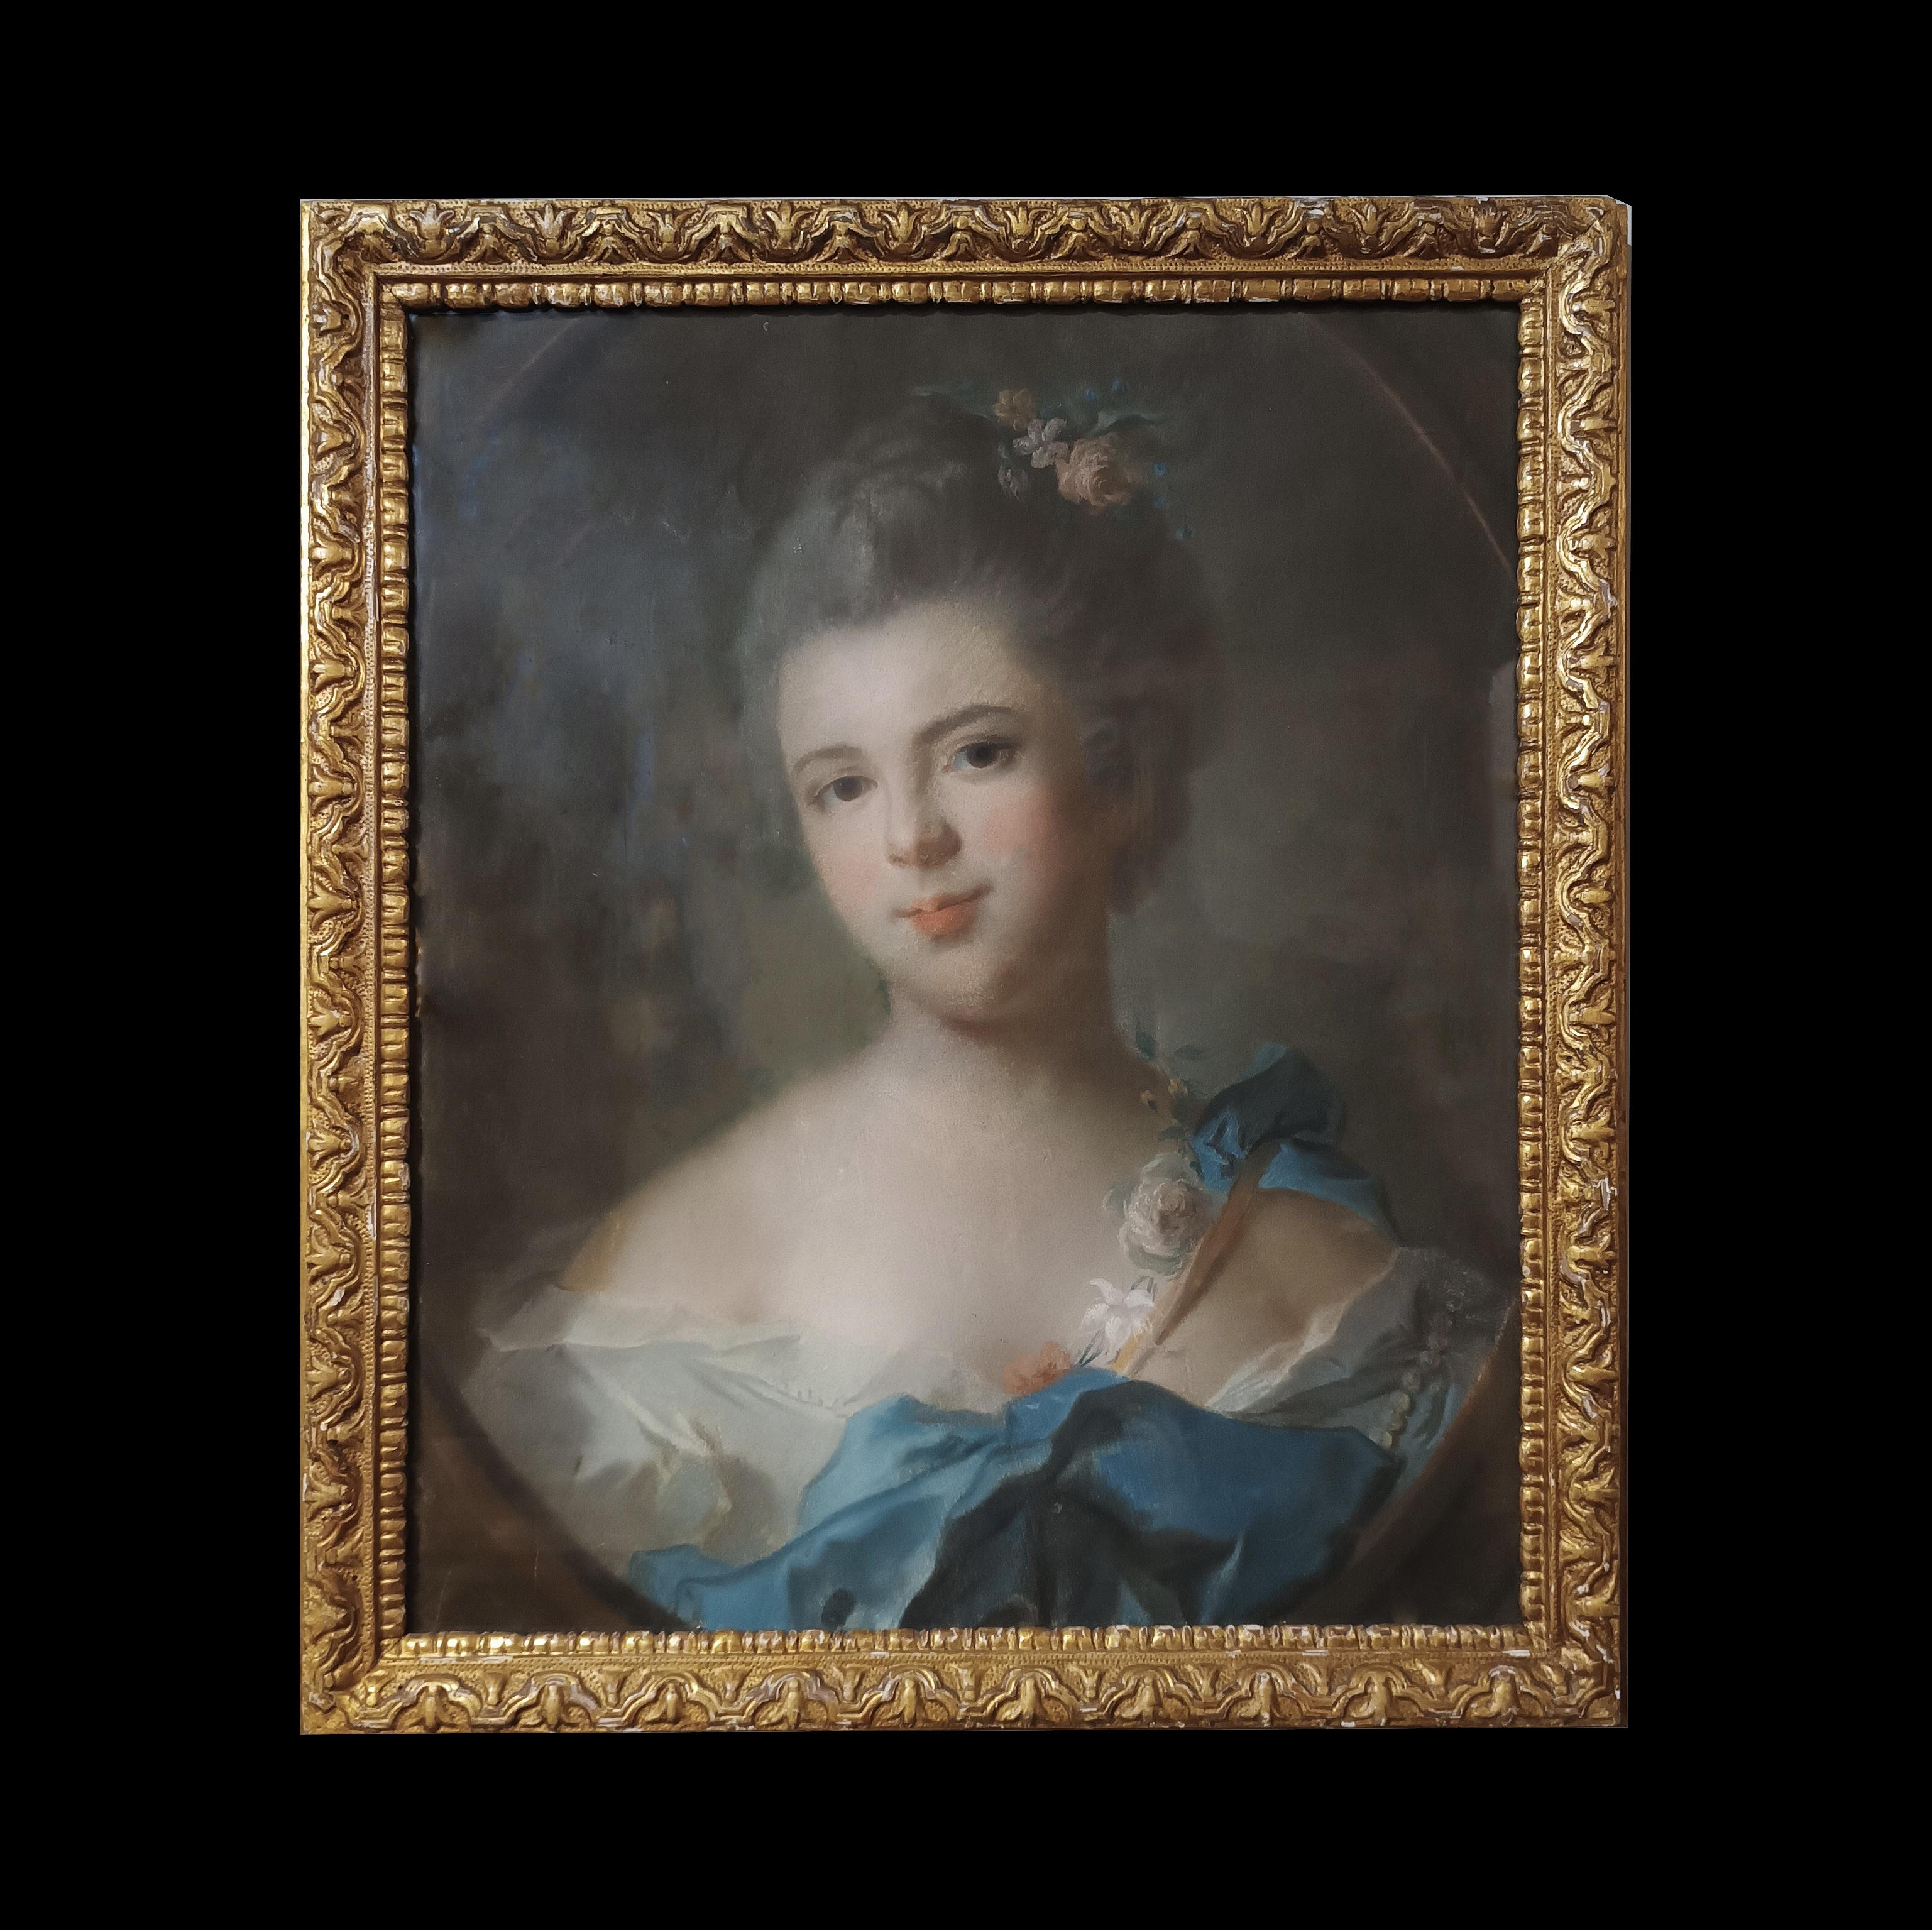 This work of art is a valuable pastel painting on cardboard, of great refinement, which depicts a young girl wearing a period dress, embellished with floral details. This work, attributable to the Venetian school of the painter Rosalba Carriera,